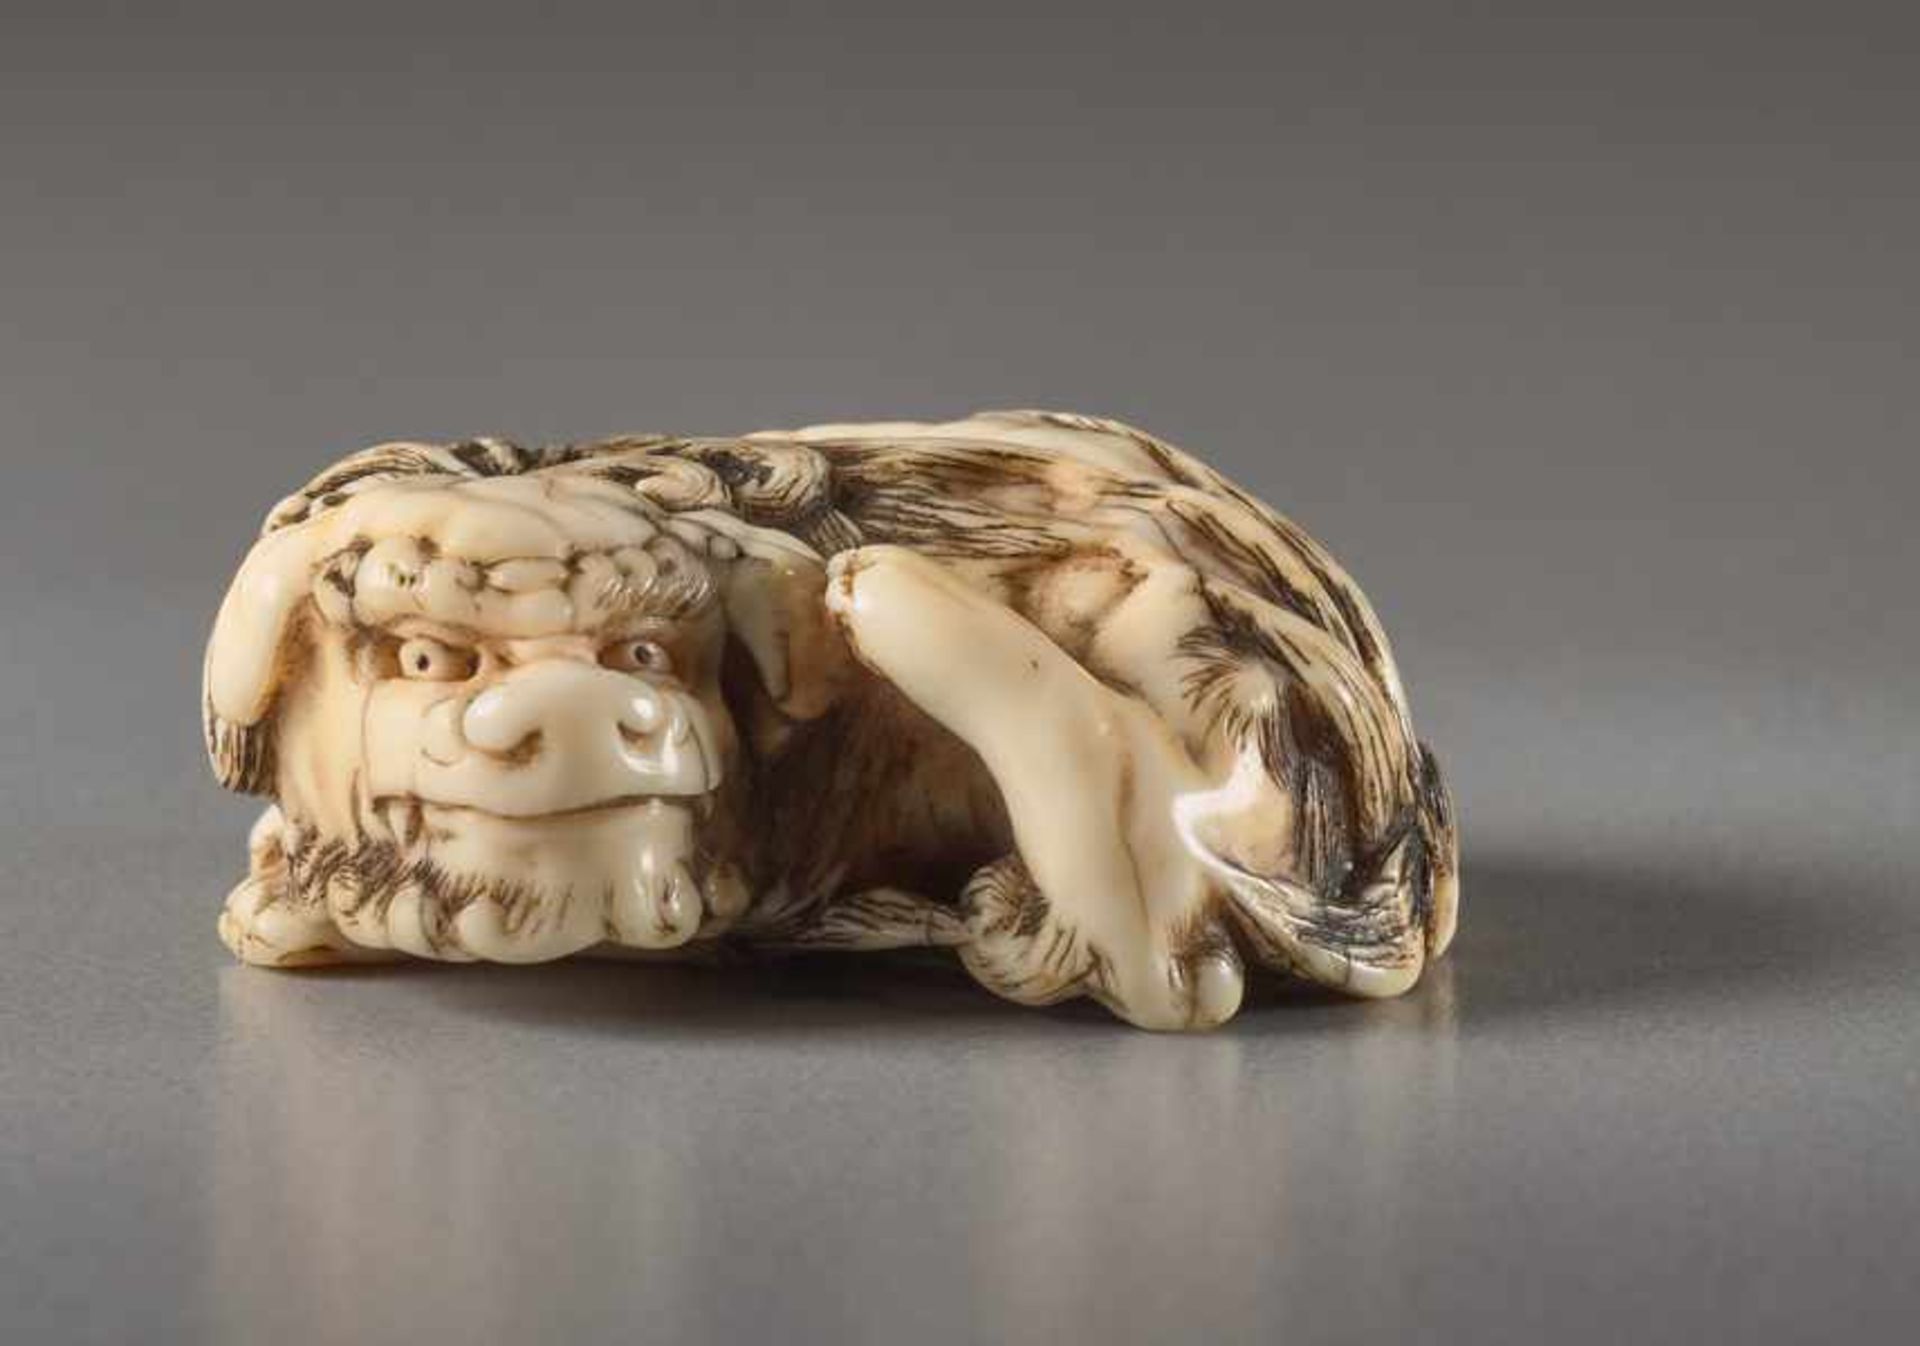 AN IVORY NETSUKE OF A RECUMBENT SHISHI Ivory netsuke. Japan, 19th centuryThis work features all